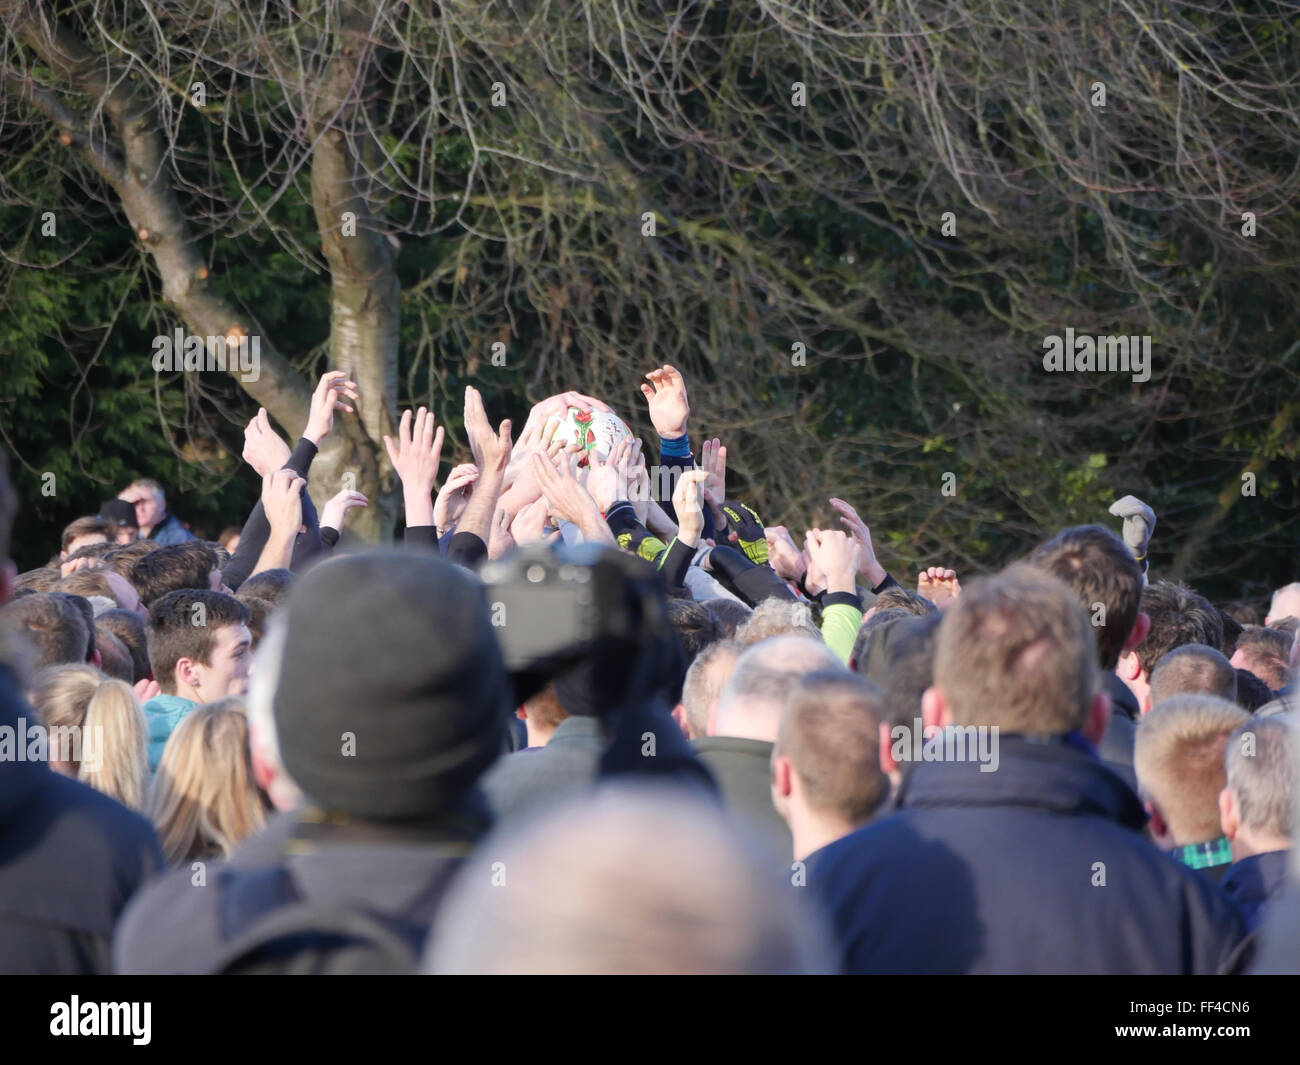 Ashbourne, Derbyshire, UK. 10th February, 2016. Ash Wednesday football match witch is the second day of the Royal Shrovetide Football match in Ashbourne, Derbyshire 2016 The Royal Shrovetide Football features the unconventional football game that is played over two eight hour periods on shrovetide Tuesday & Ash Wednesday. The goal posts 3 miles apart in the river which separated the Northern & Southern half of the Derbyshire town. Credit:  Doug Blane/Alamy Live News Stock Photo